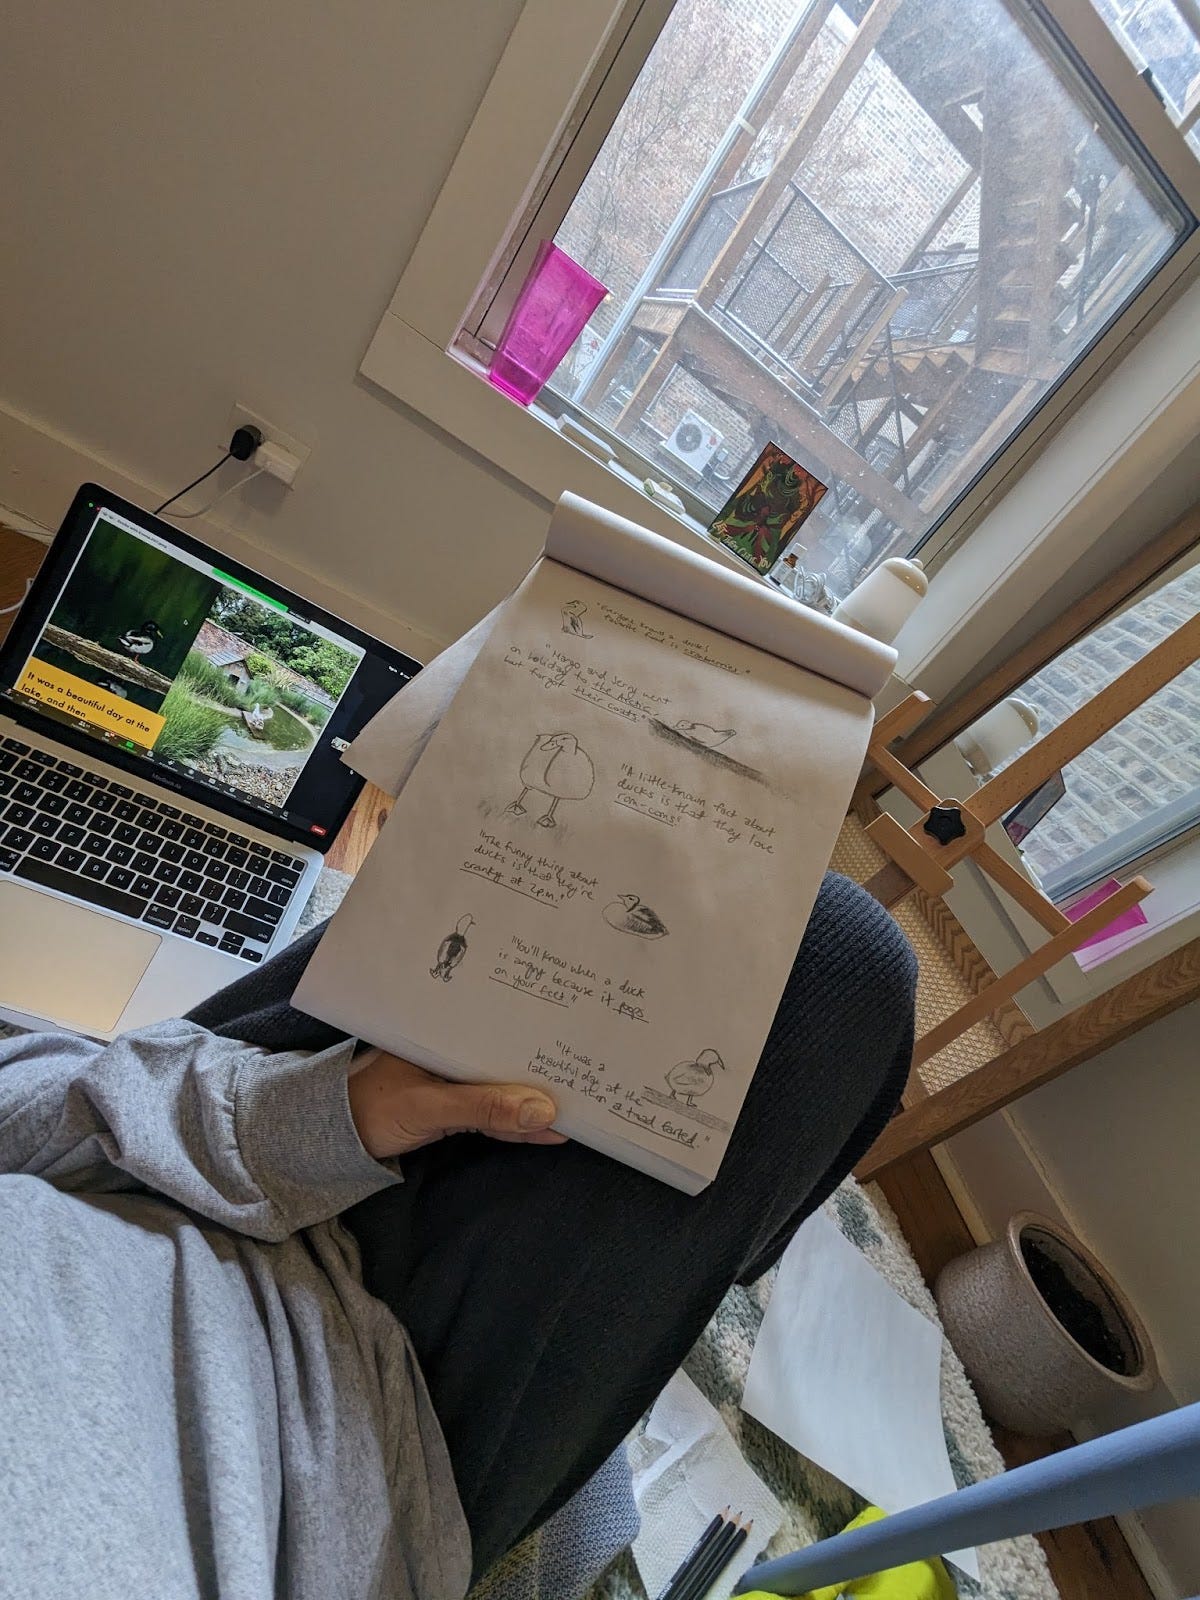 Nathalie lays on her bedroom rug in front of her laptop which show a photo of a duck she is trying to draw on her sketch pad. Her sketch pad sit on her lap showing a handful of duck drawings and fill in the work sentences that were part of the activity